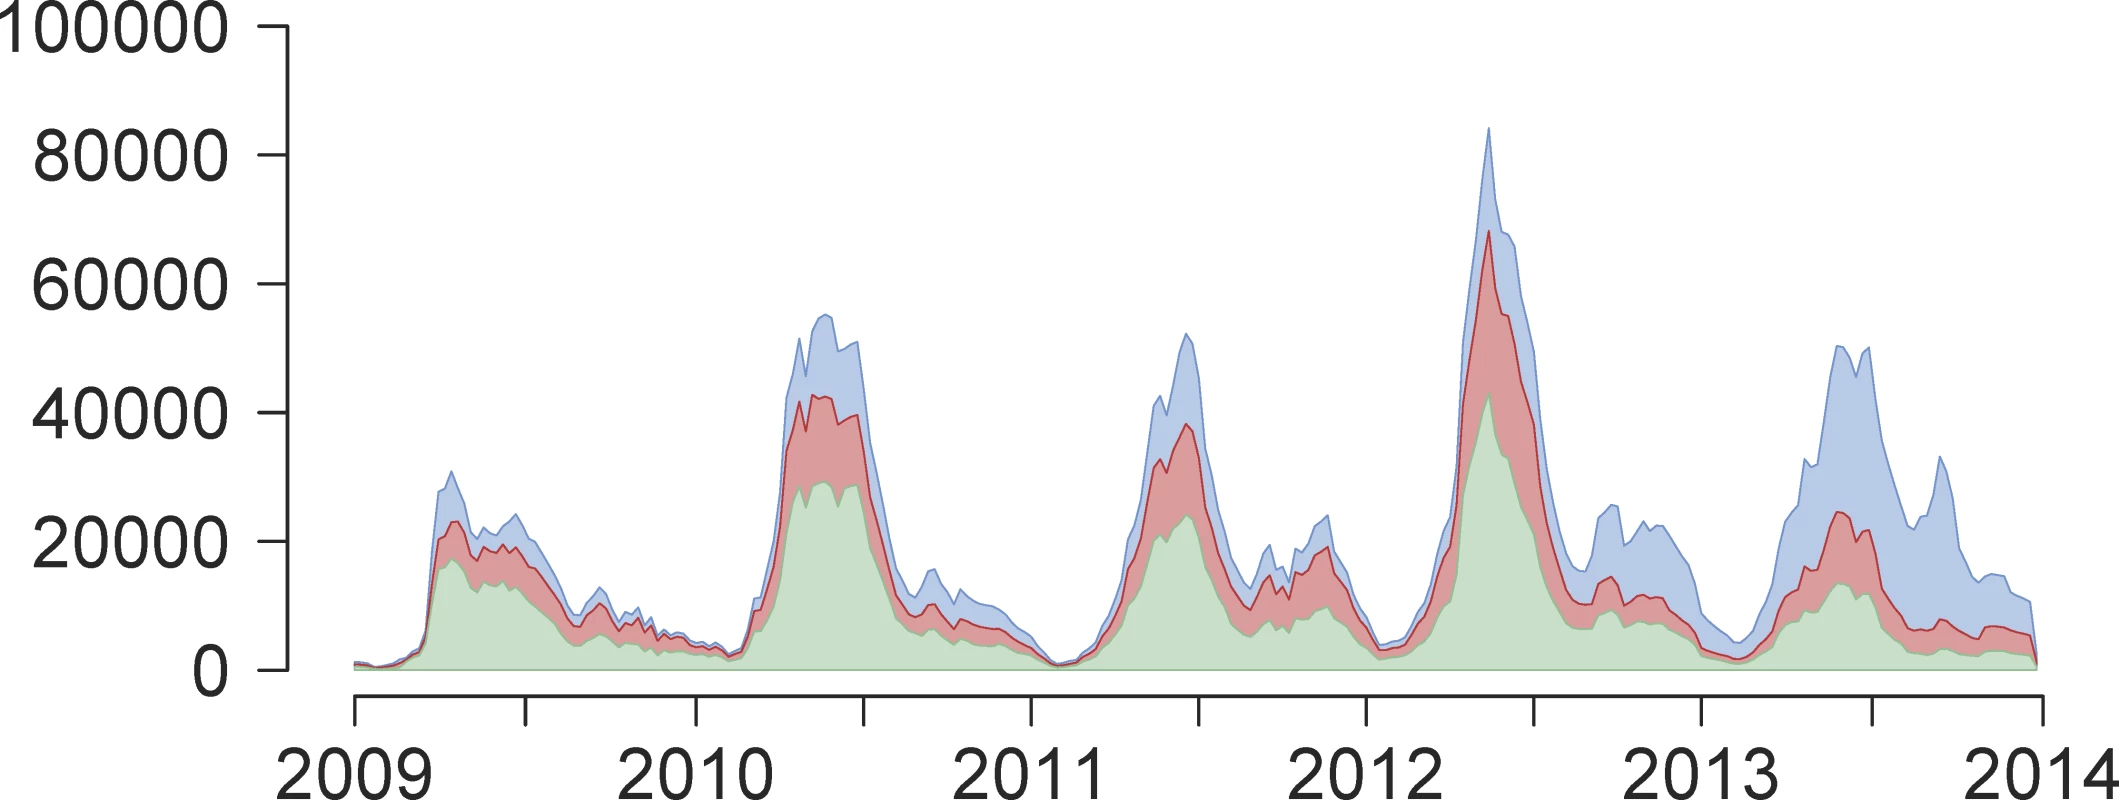 Weekly reported time series of HFMD cases between 1 January 2009 and 31 December 2013.